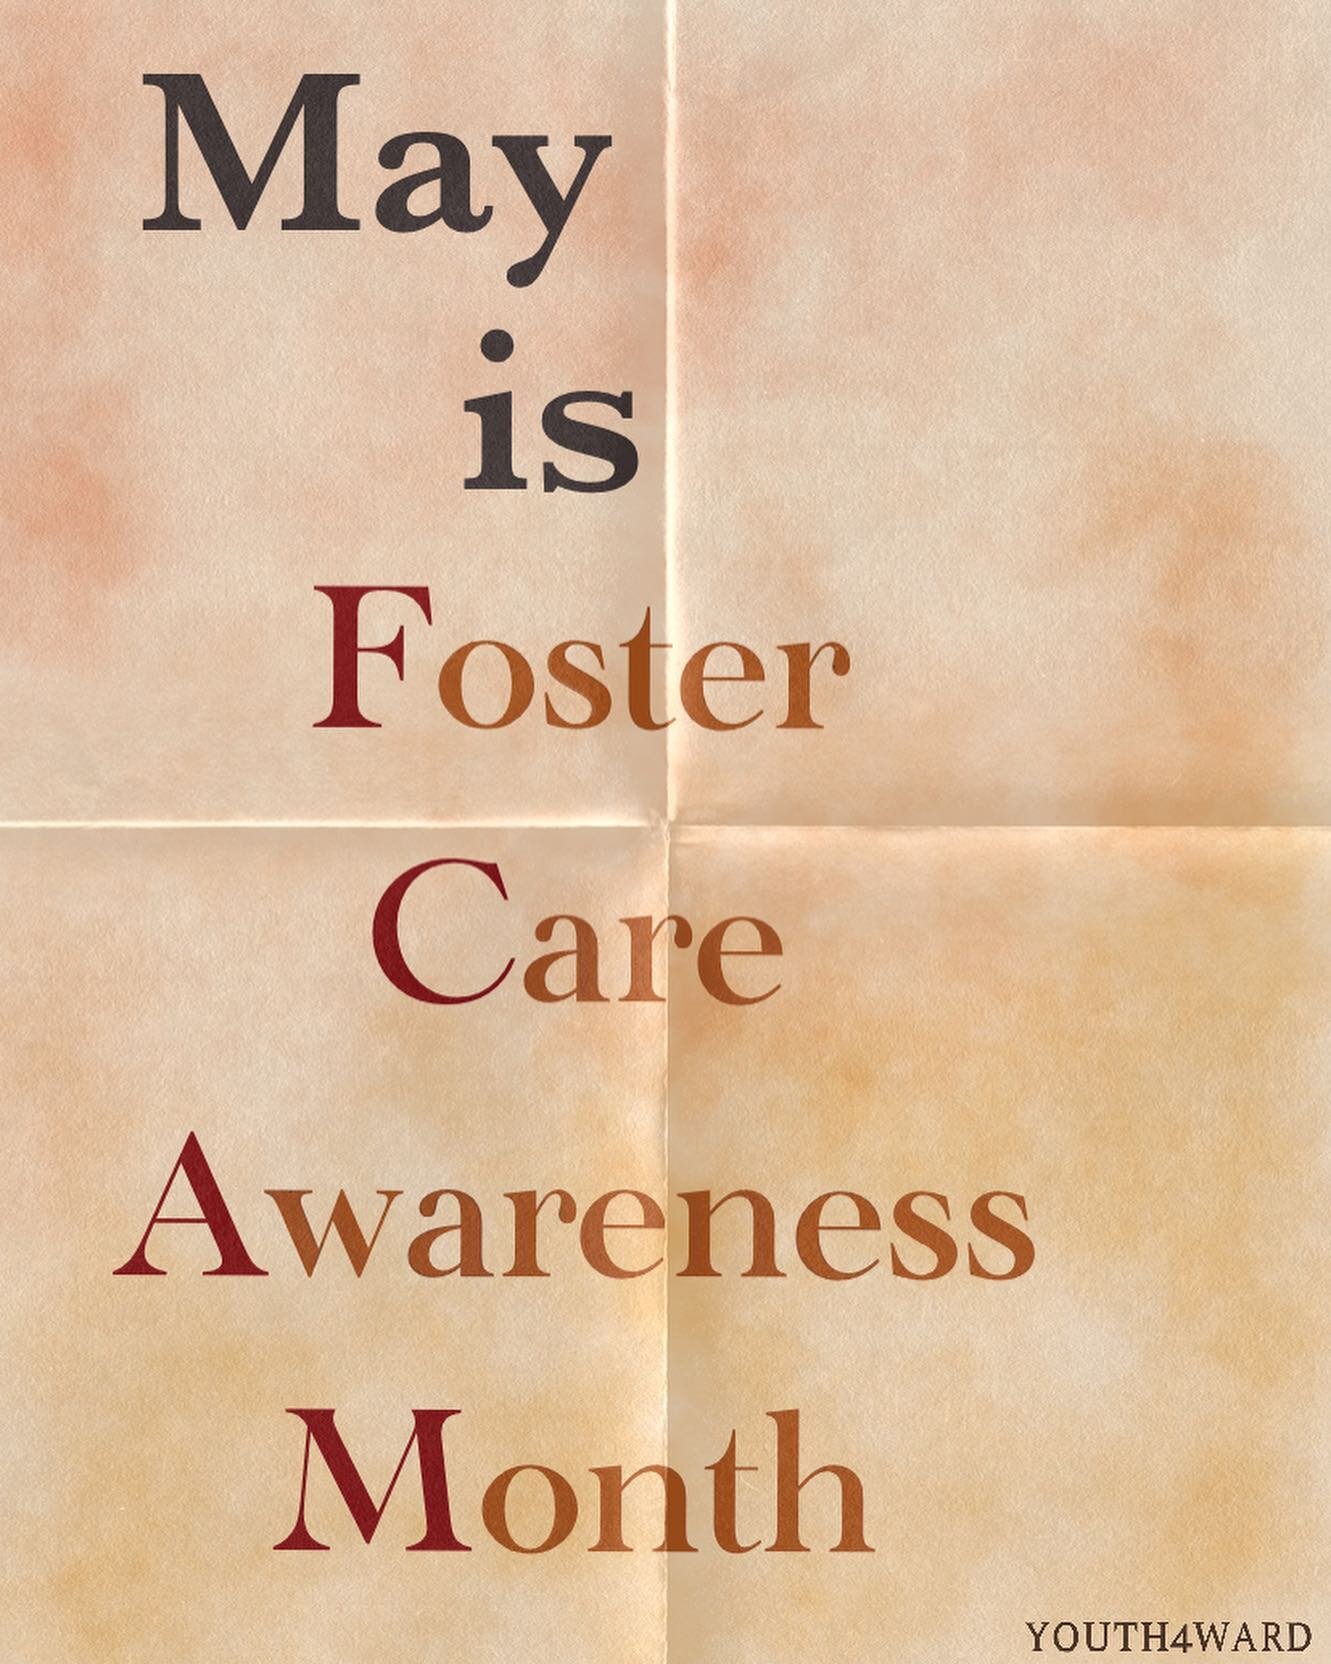 Happy Foster Care Awareness month! Throughout May, we&rsquo;ll be posting information about current foster care systems and ways you can support foster care organizations. 

#youth4ward #childwelfare #fostercare #fostercareawarenessmonth